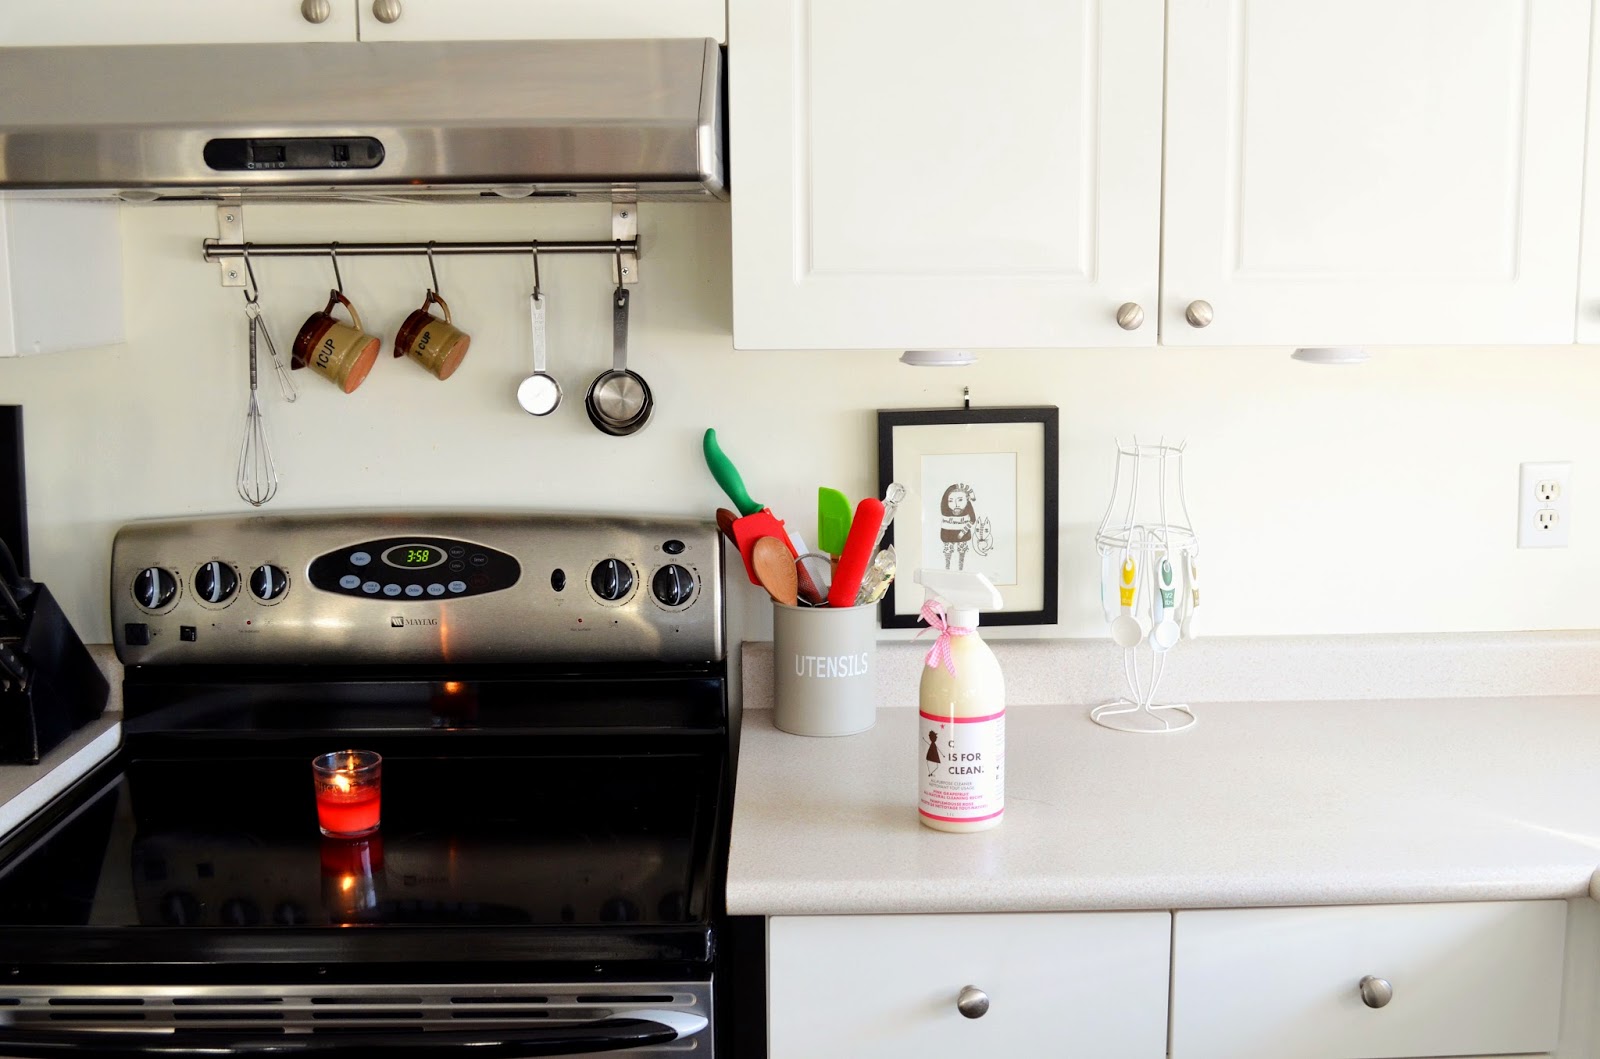 How to Clean Your Kitchen (for Real This Time)